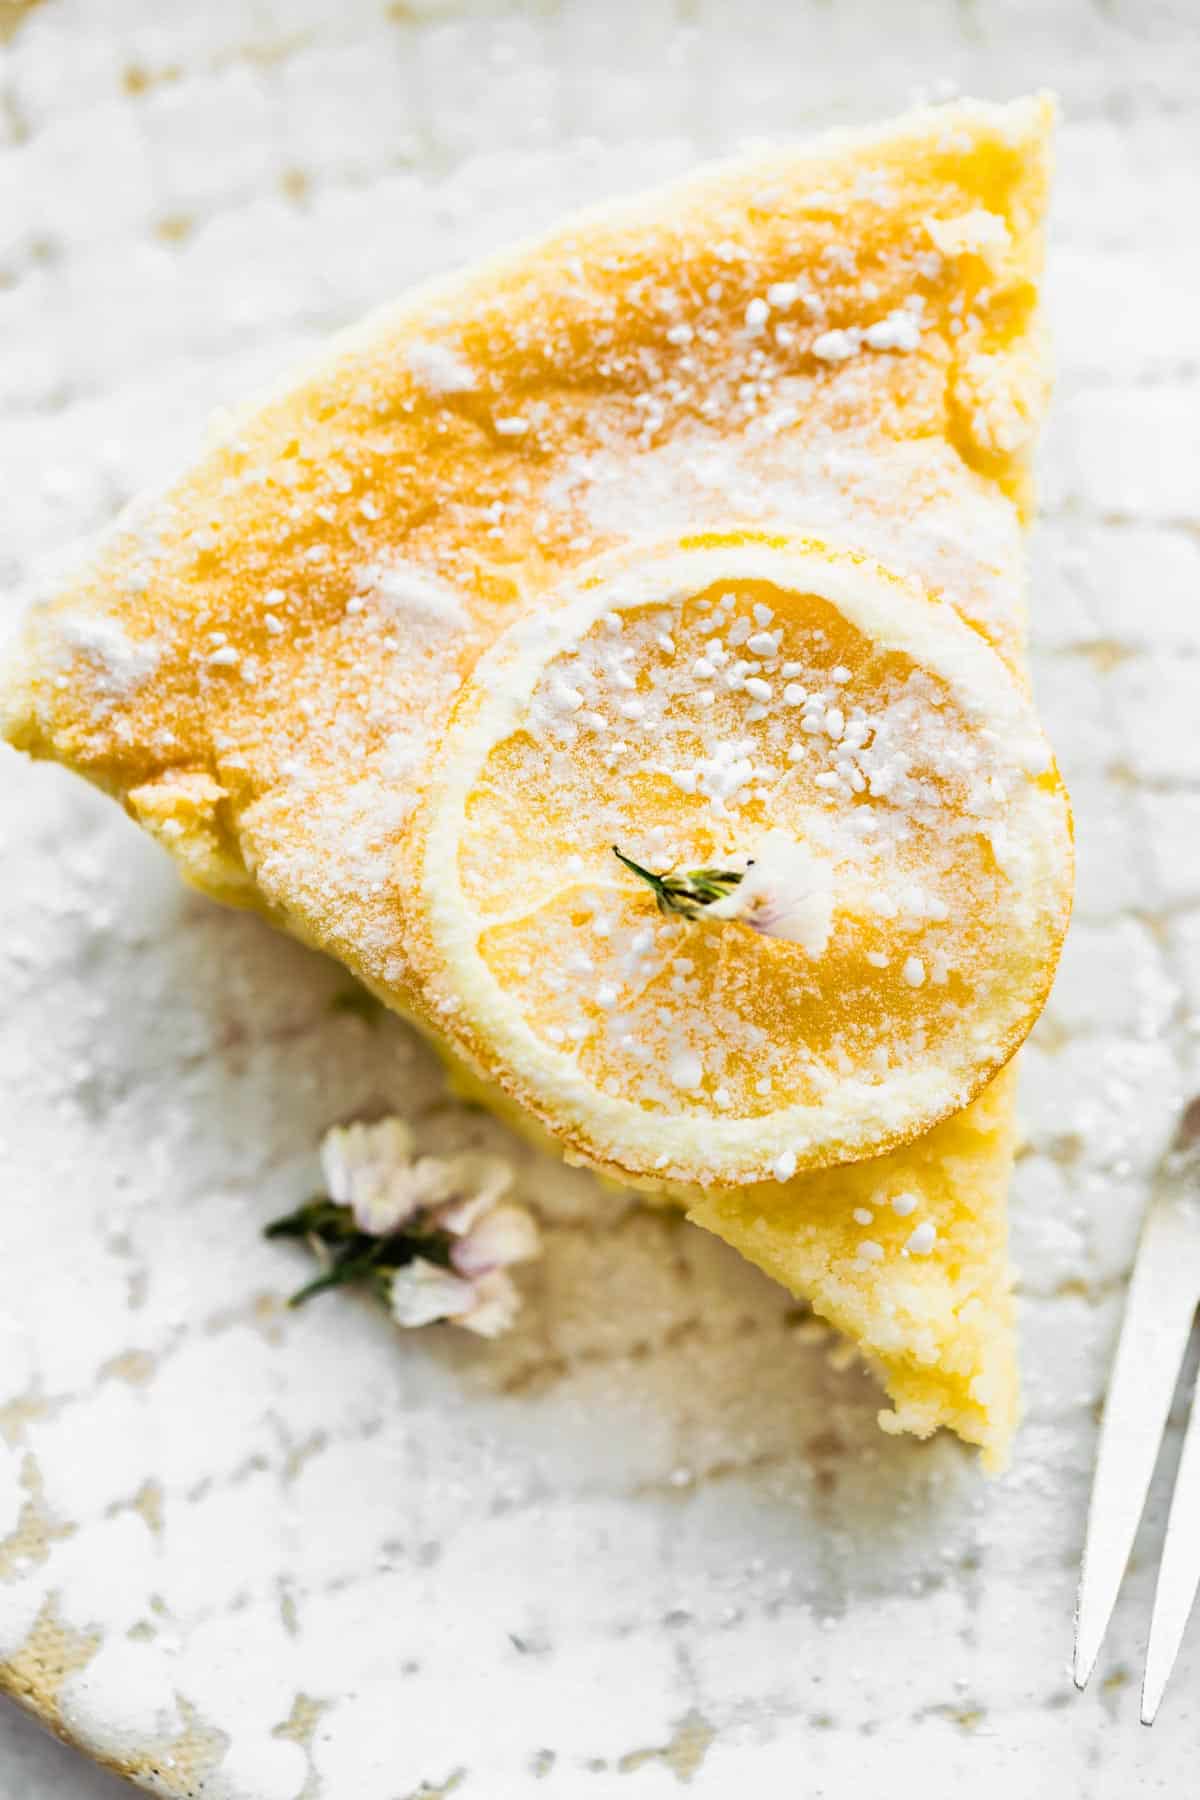 Overhead image of a slice of gluten free lemon pudding cake dusted with powdered sugar.